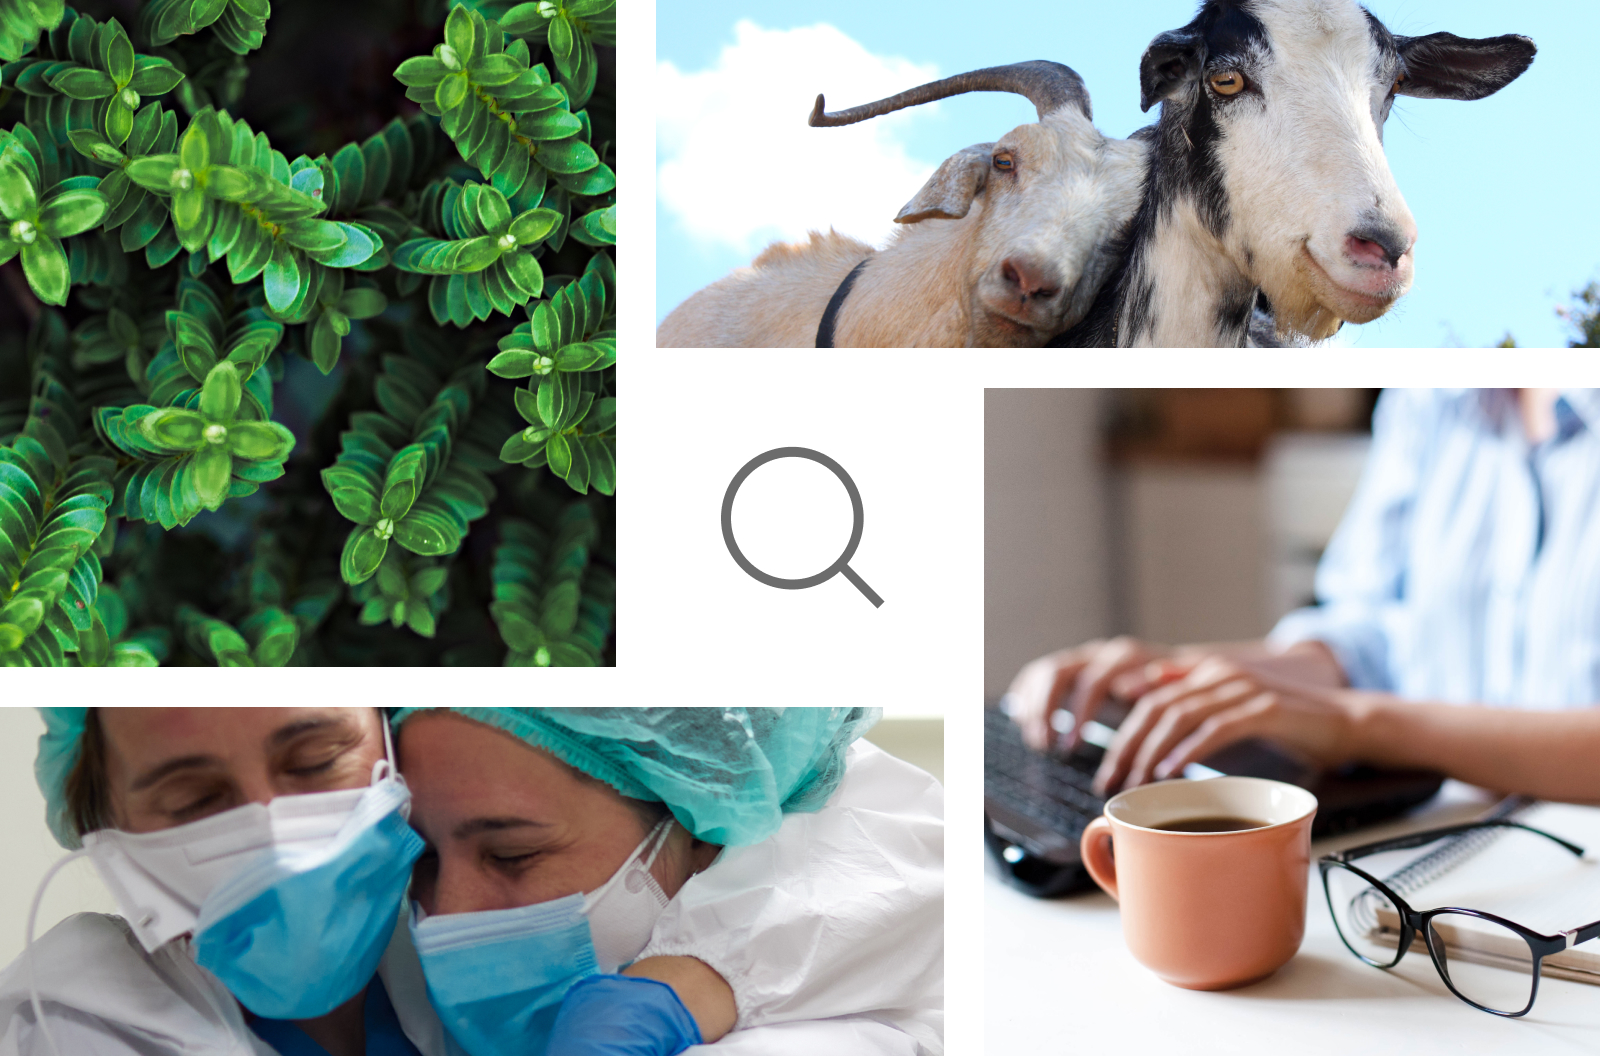 A gallery of images featuring nurses, plants, goats, and a representation of remote work, all surrounding a search icon.